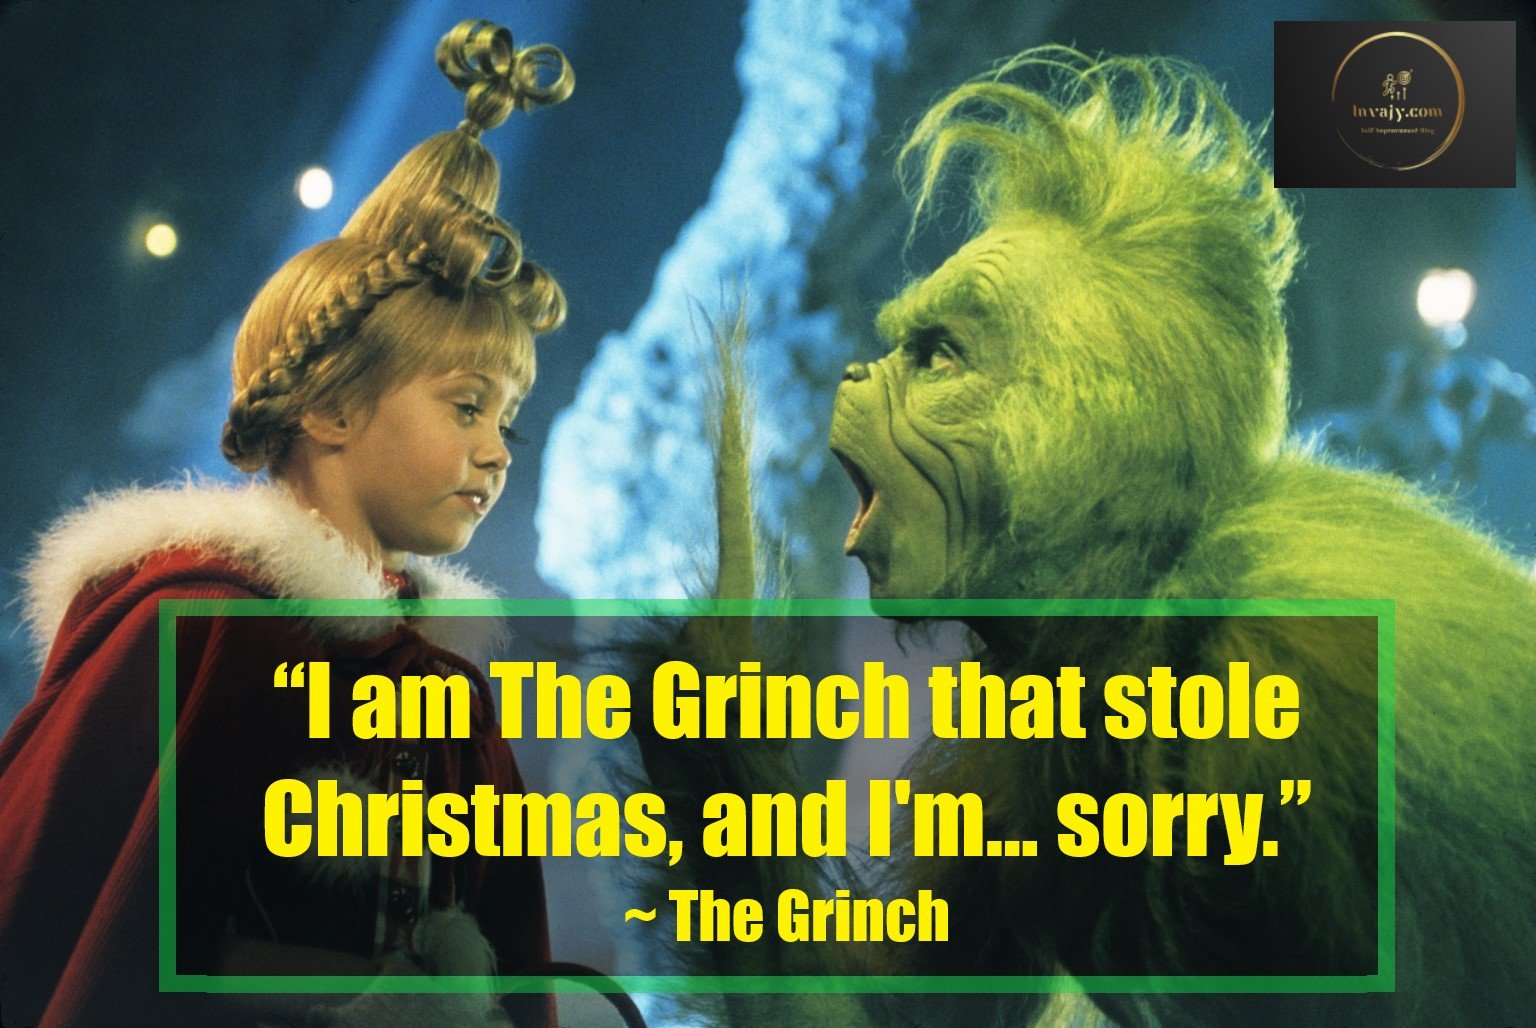 50 The Grinch Quotes from 'How the Grinch Stole Christmas'